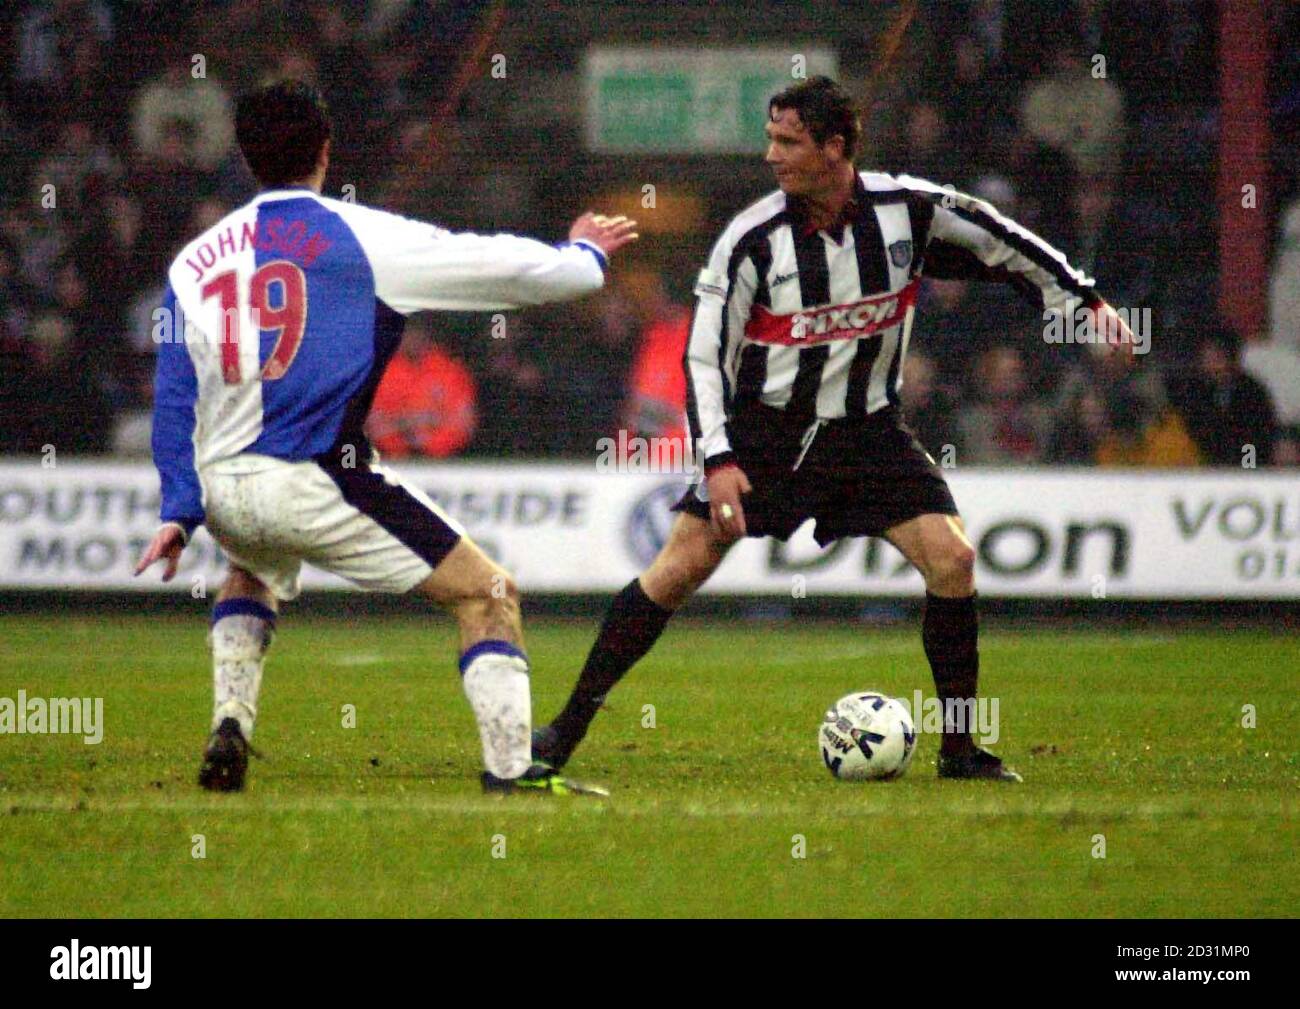 Grimsby Town's Tony Gallimore (right) looking to pass, as Blackburn Rover's Damien Johnson runs towards him, during the Nationwide Division One game at Blundell Park, Grimsby. Stock Photo